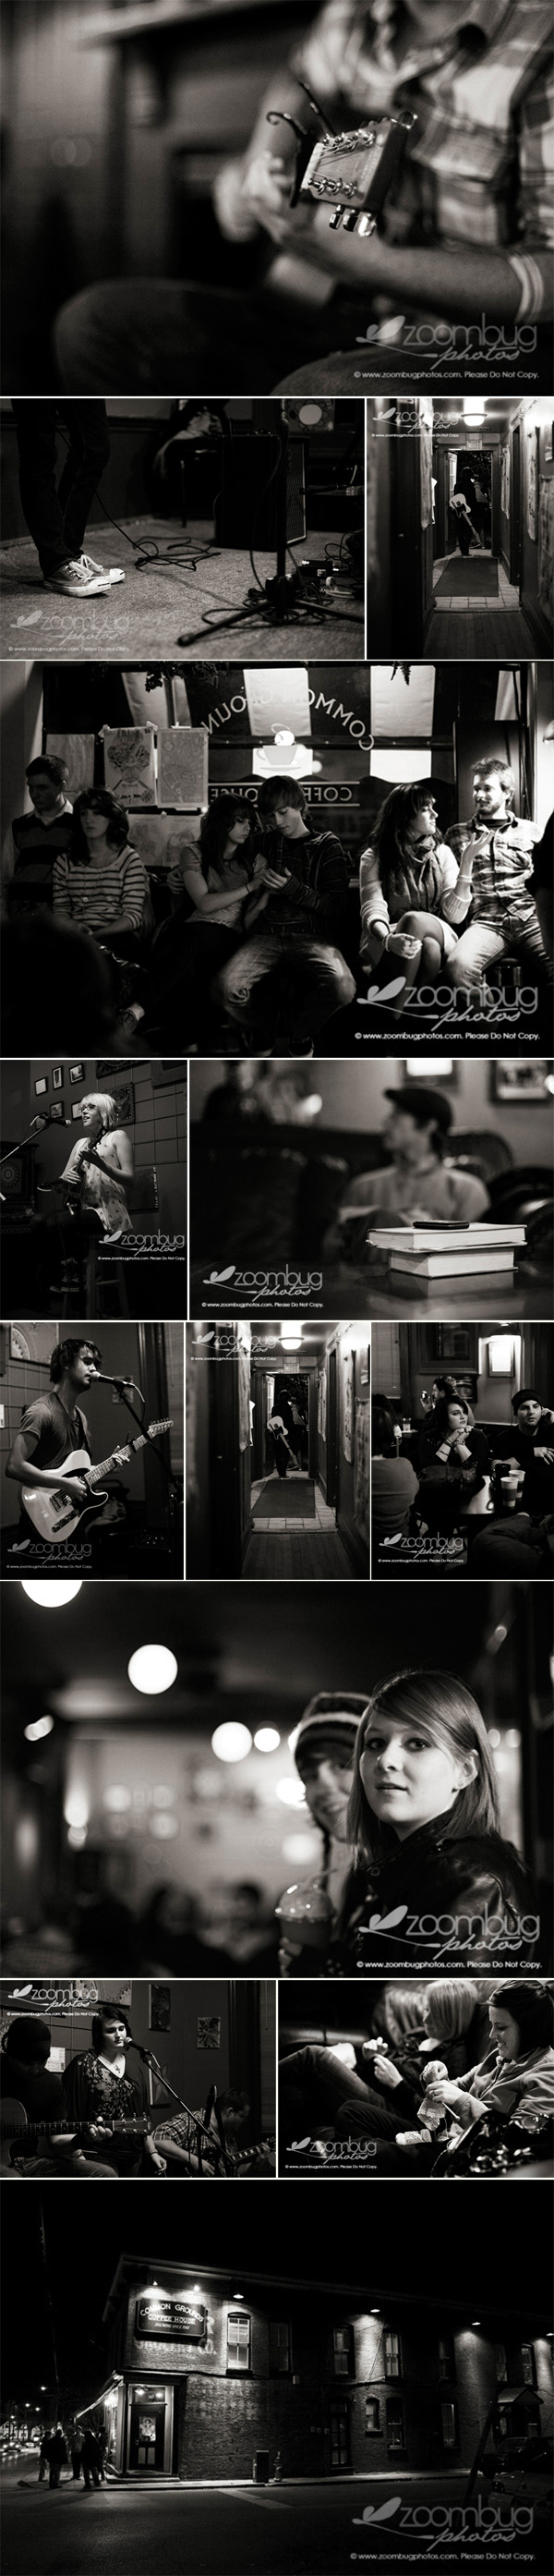 common grounds cafe open mic images